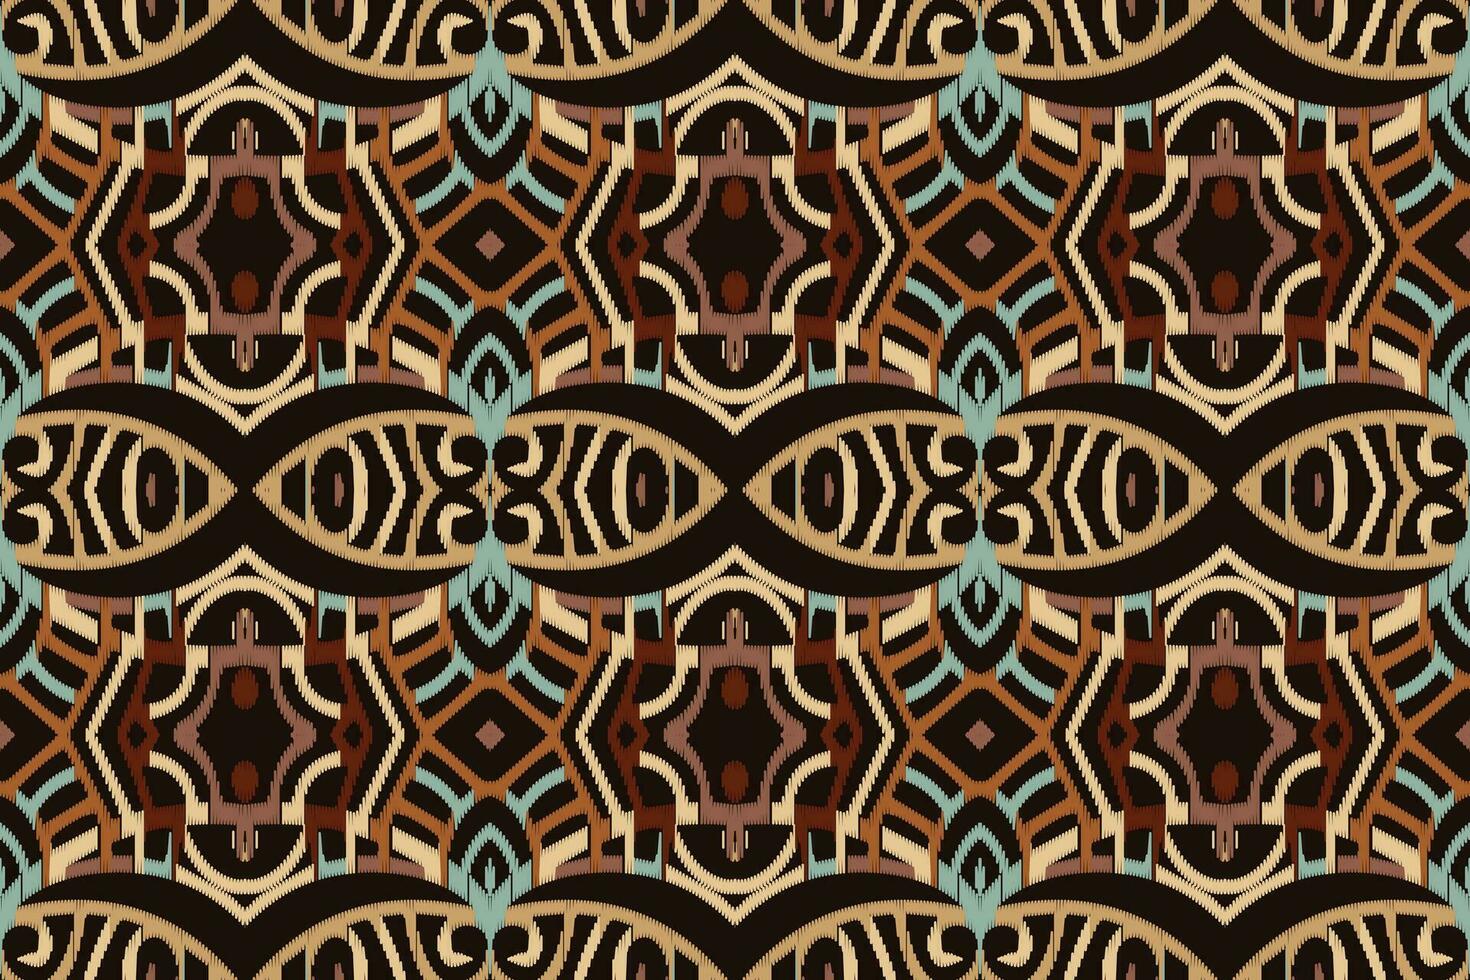 Motif Ikat Paisley Embroidery Background. Ikat Chevron Geometric Ethnic Oriental Pattern traditional.aztec Style Abstract Vector illustration.design for Texture,fabric,clothing,wrapping,sarong.